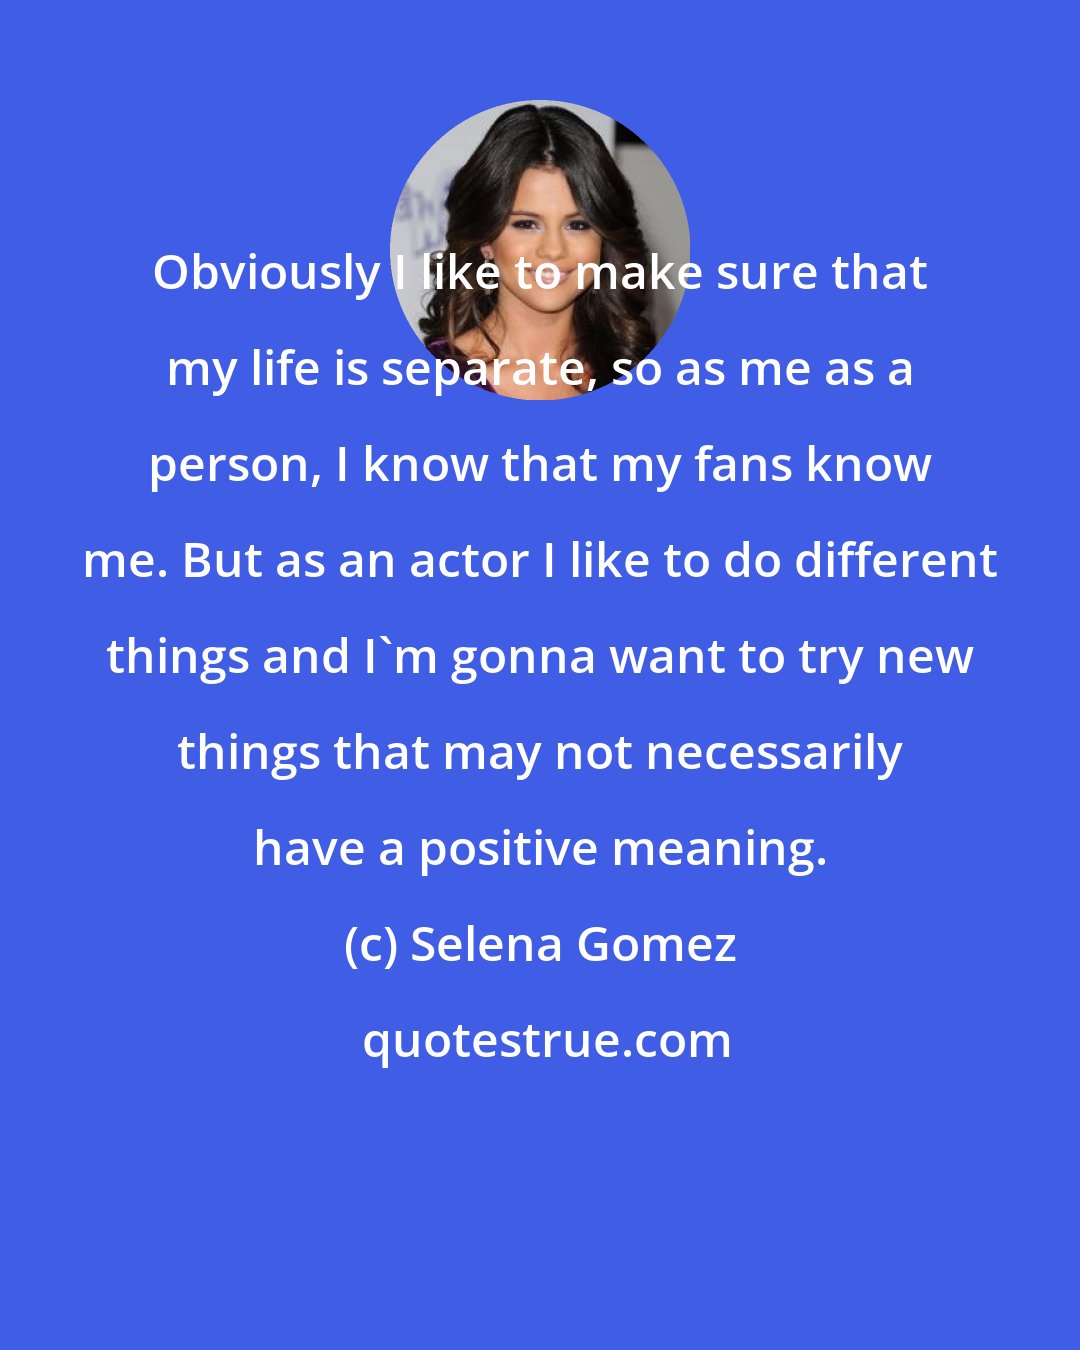 Selena Gomez: Obviously I like to make sure that my life is separate, so as me as a person, I know that my fans know me. But as an actor I like to do different things and I'm gonna want to try new things that may not necessarily have a positive meaning.